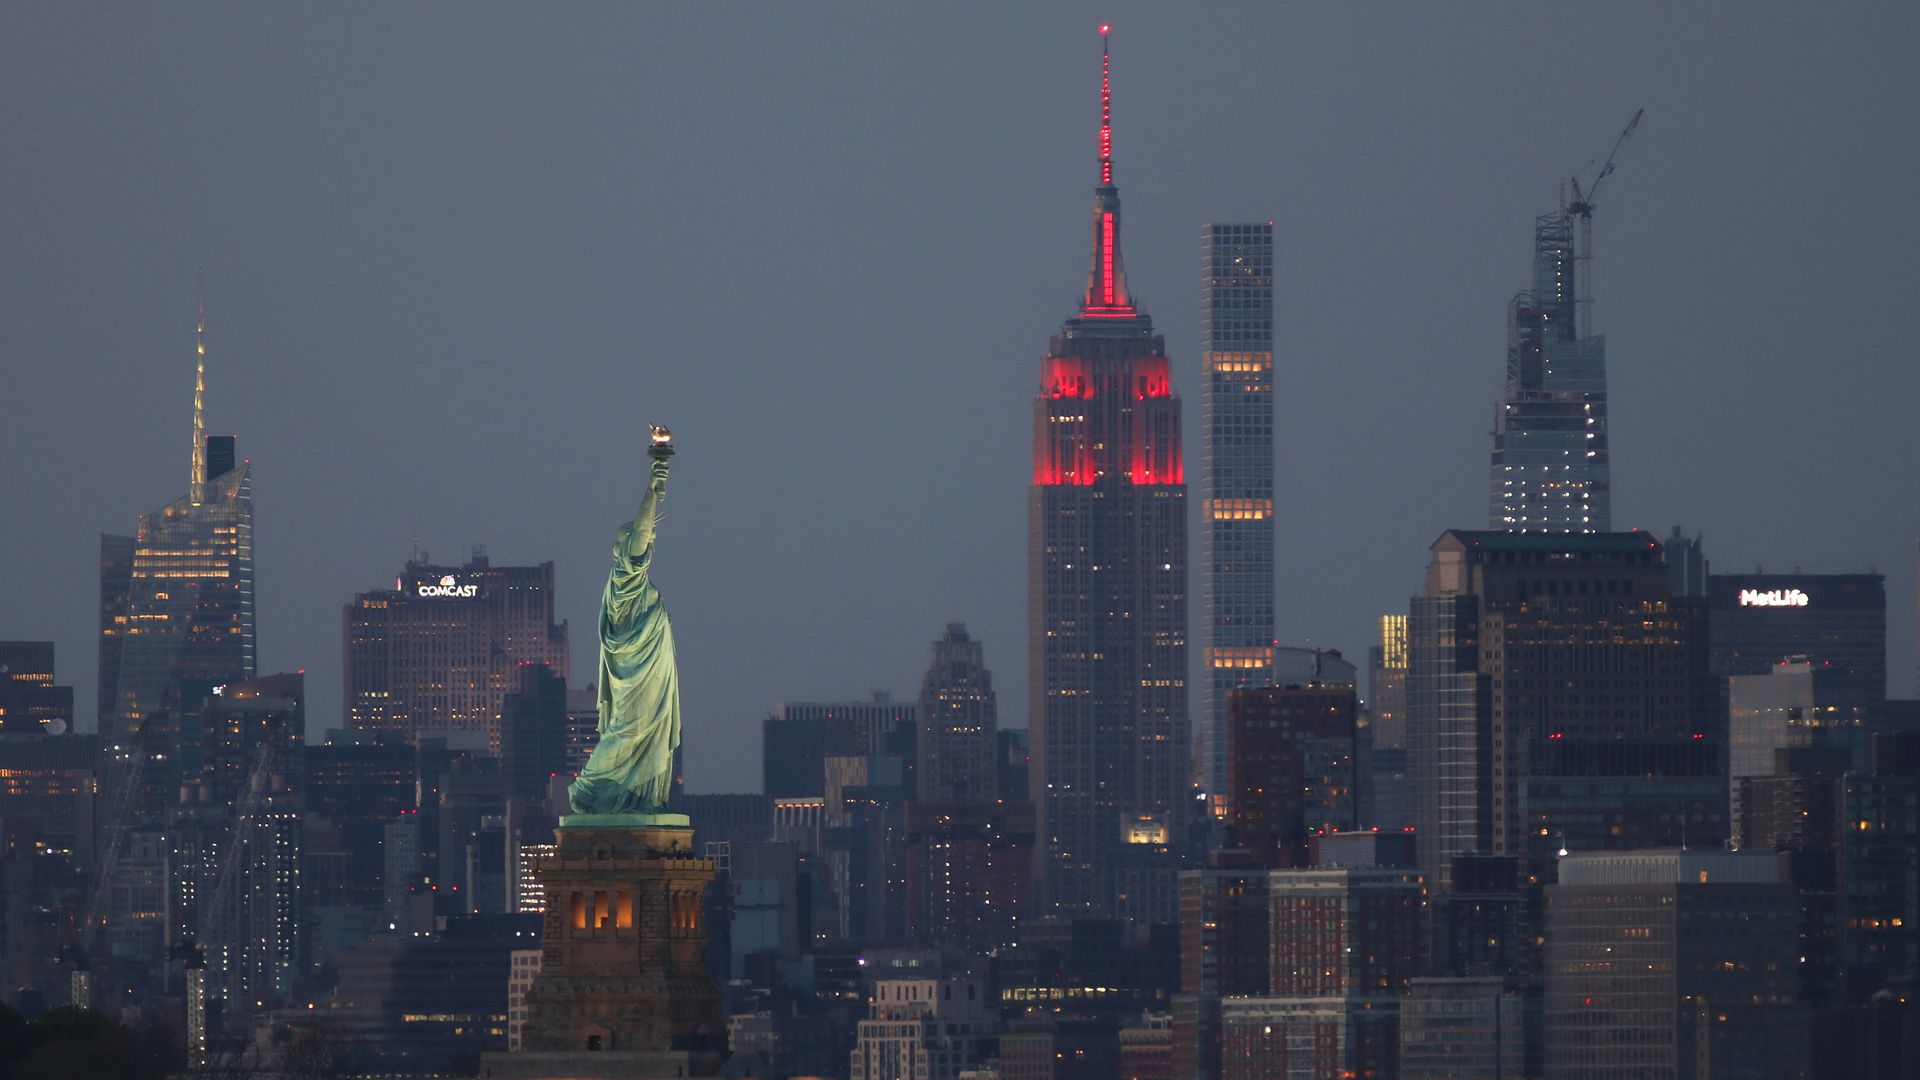 : Th Empire State Building sits behind the Statue of Liberty in New York City as it continues to honor COVID-19 healthcare workers by being lit in red on May 3, 2020 in Bayonne, New Jersey